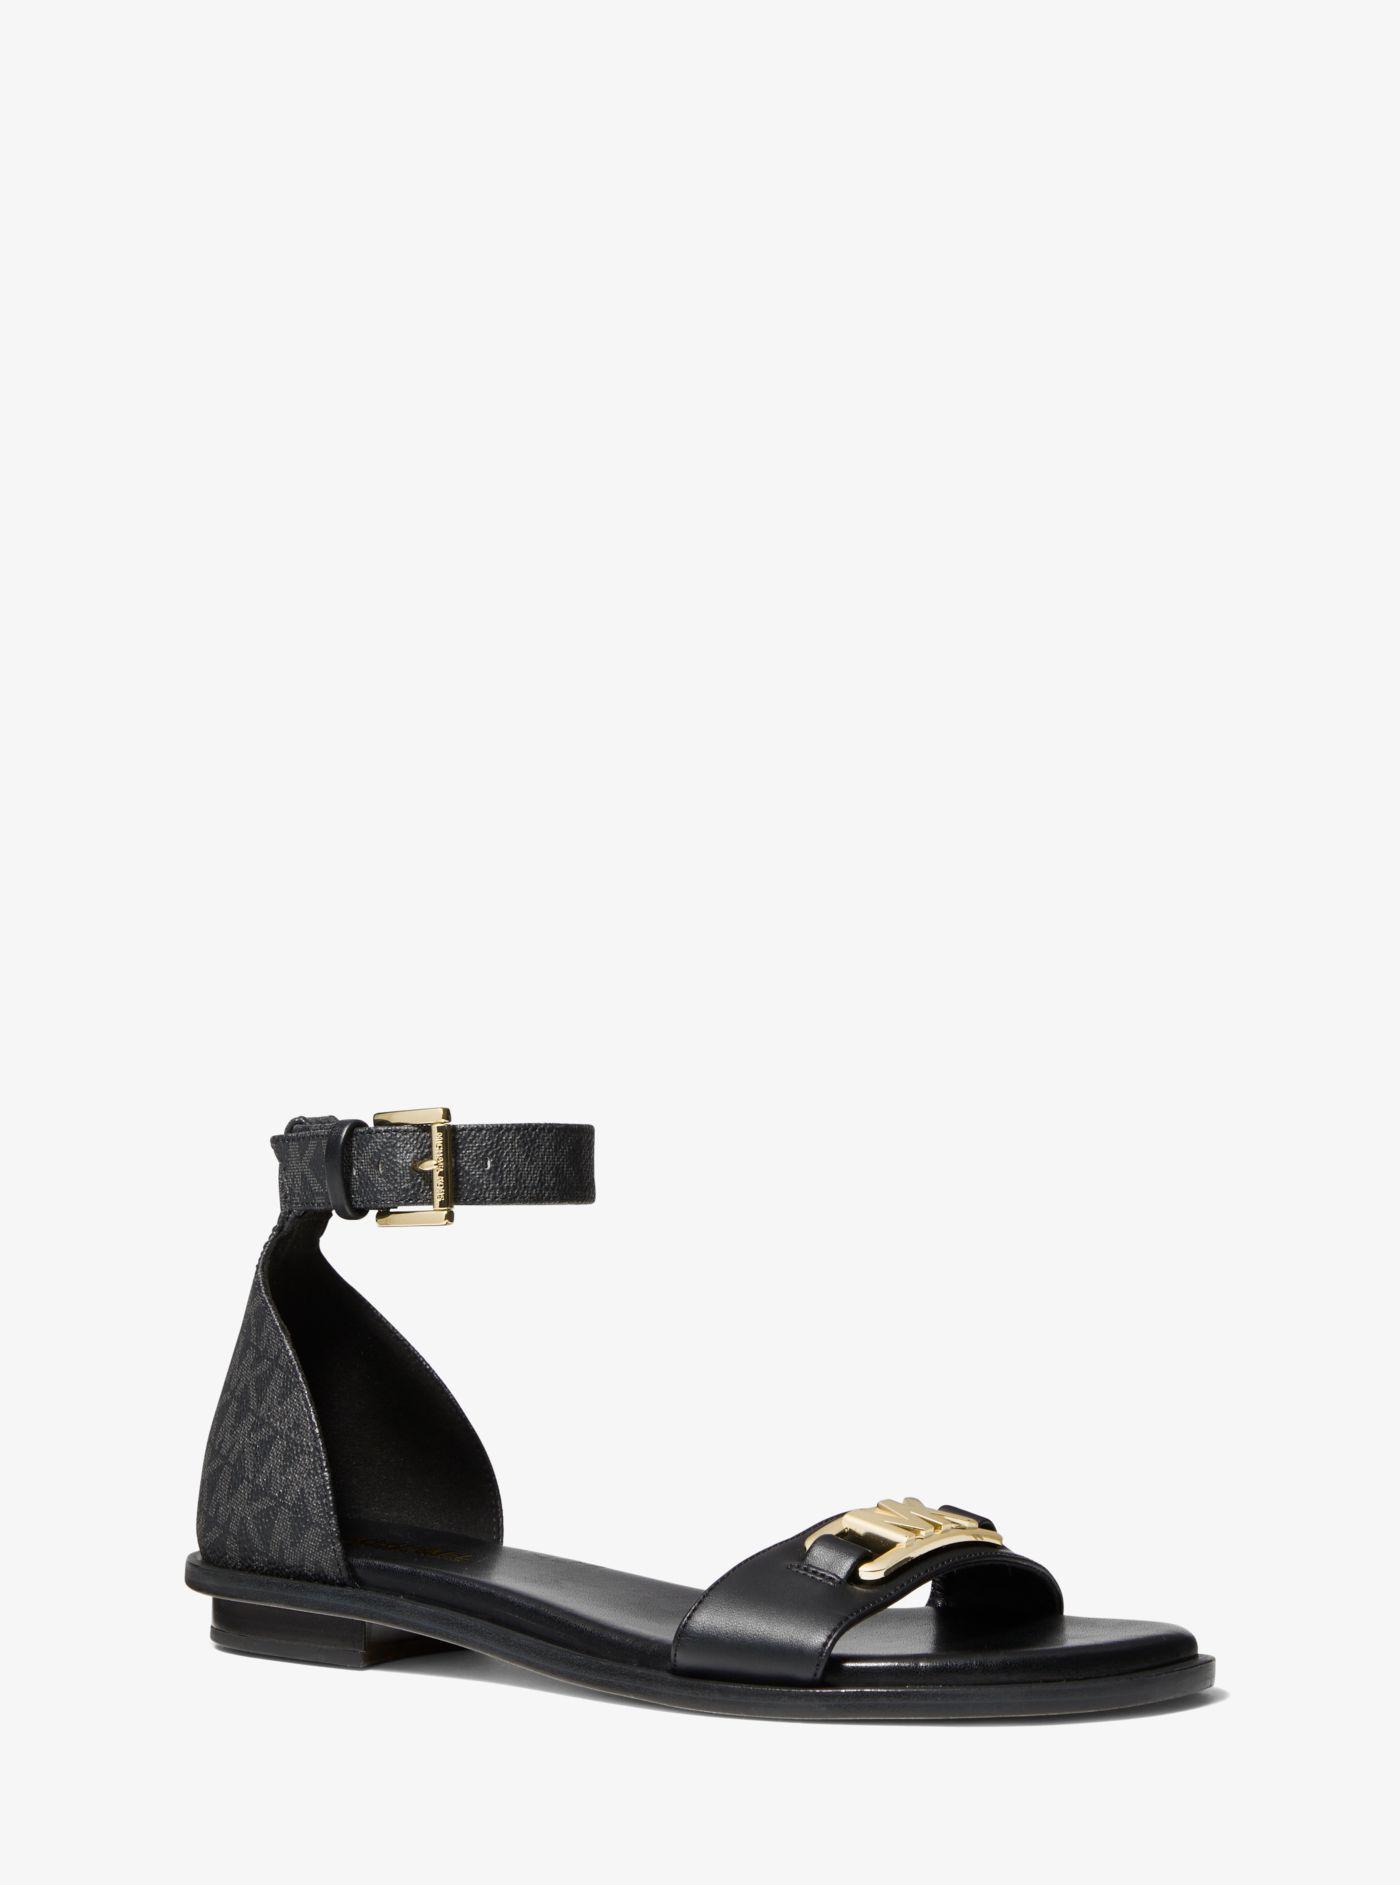 Michael Kors Camila Logo And Faux Leather Sandal in Black | Lyst